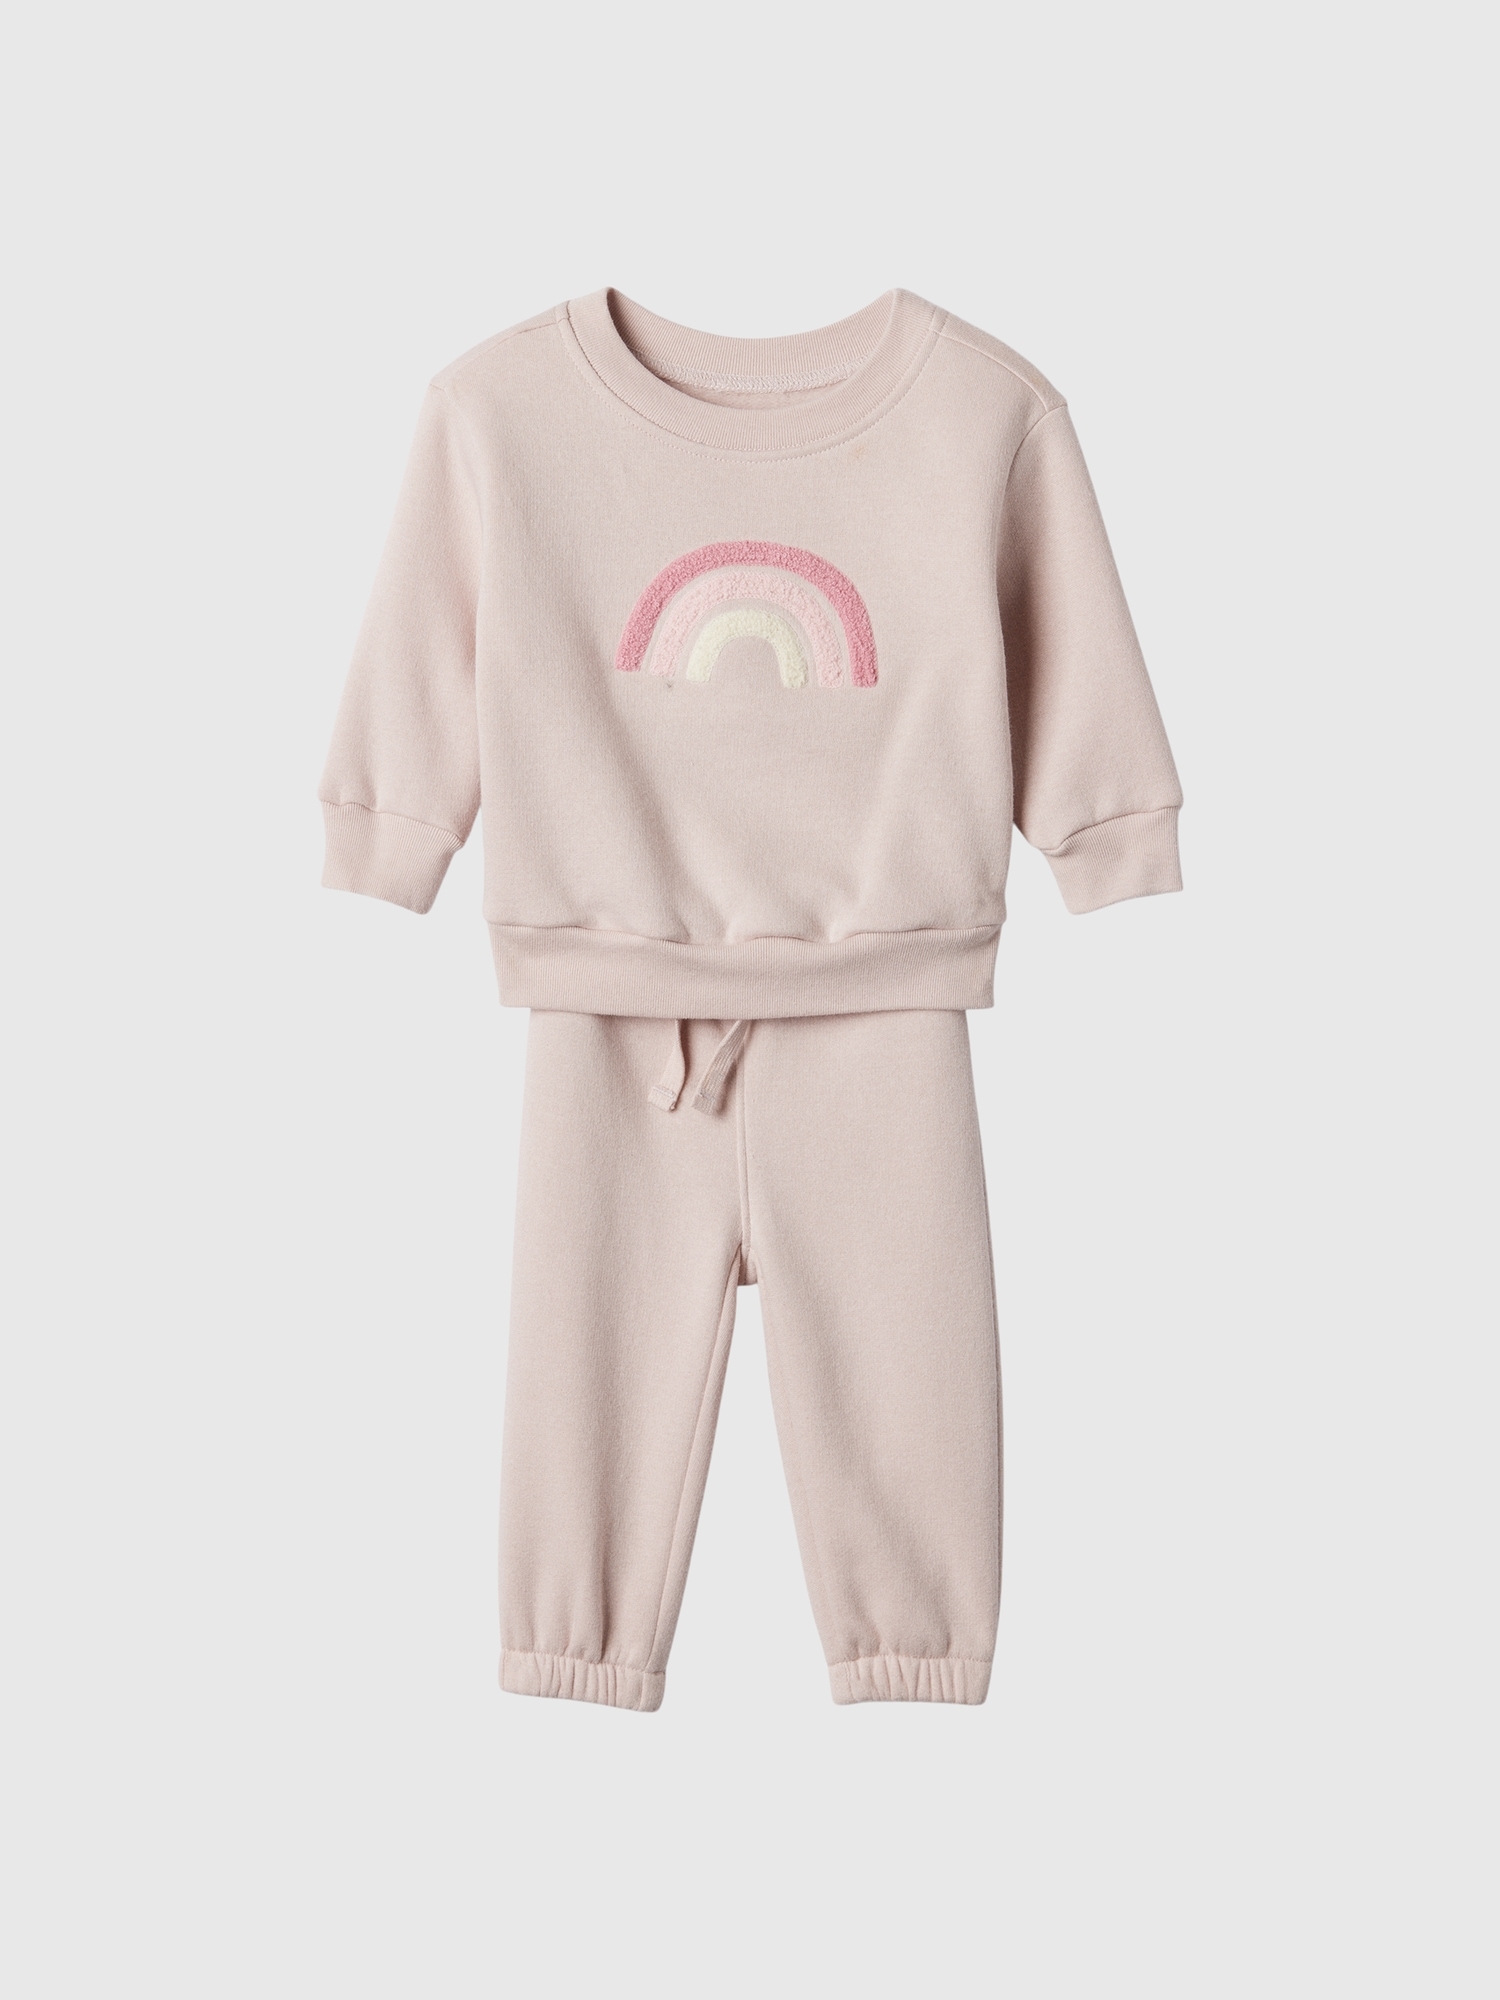 Baby Fleece Two-Piece Outfit Set